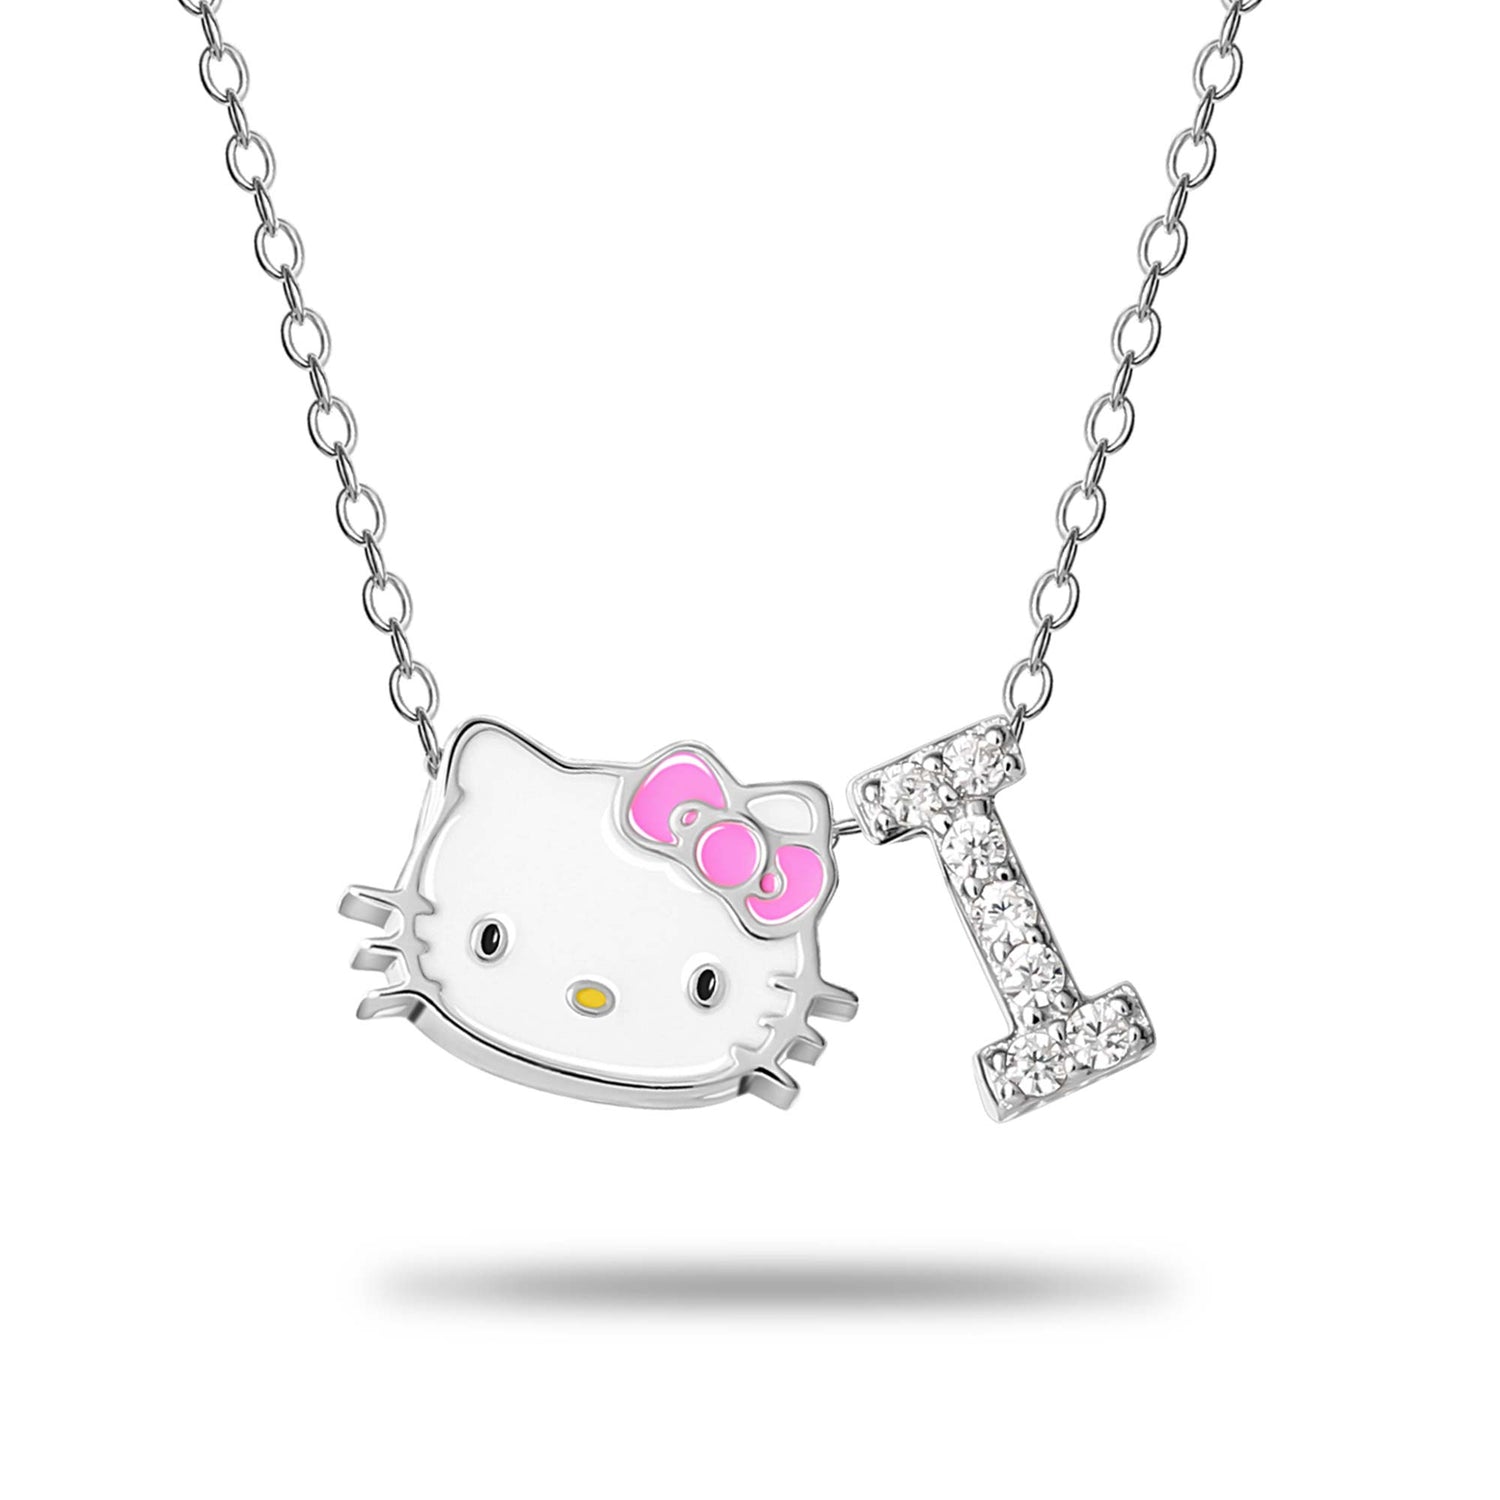 Hello Kitty Jewelry Necklaces - Shop on Pinterest